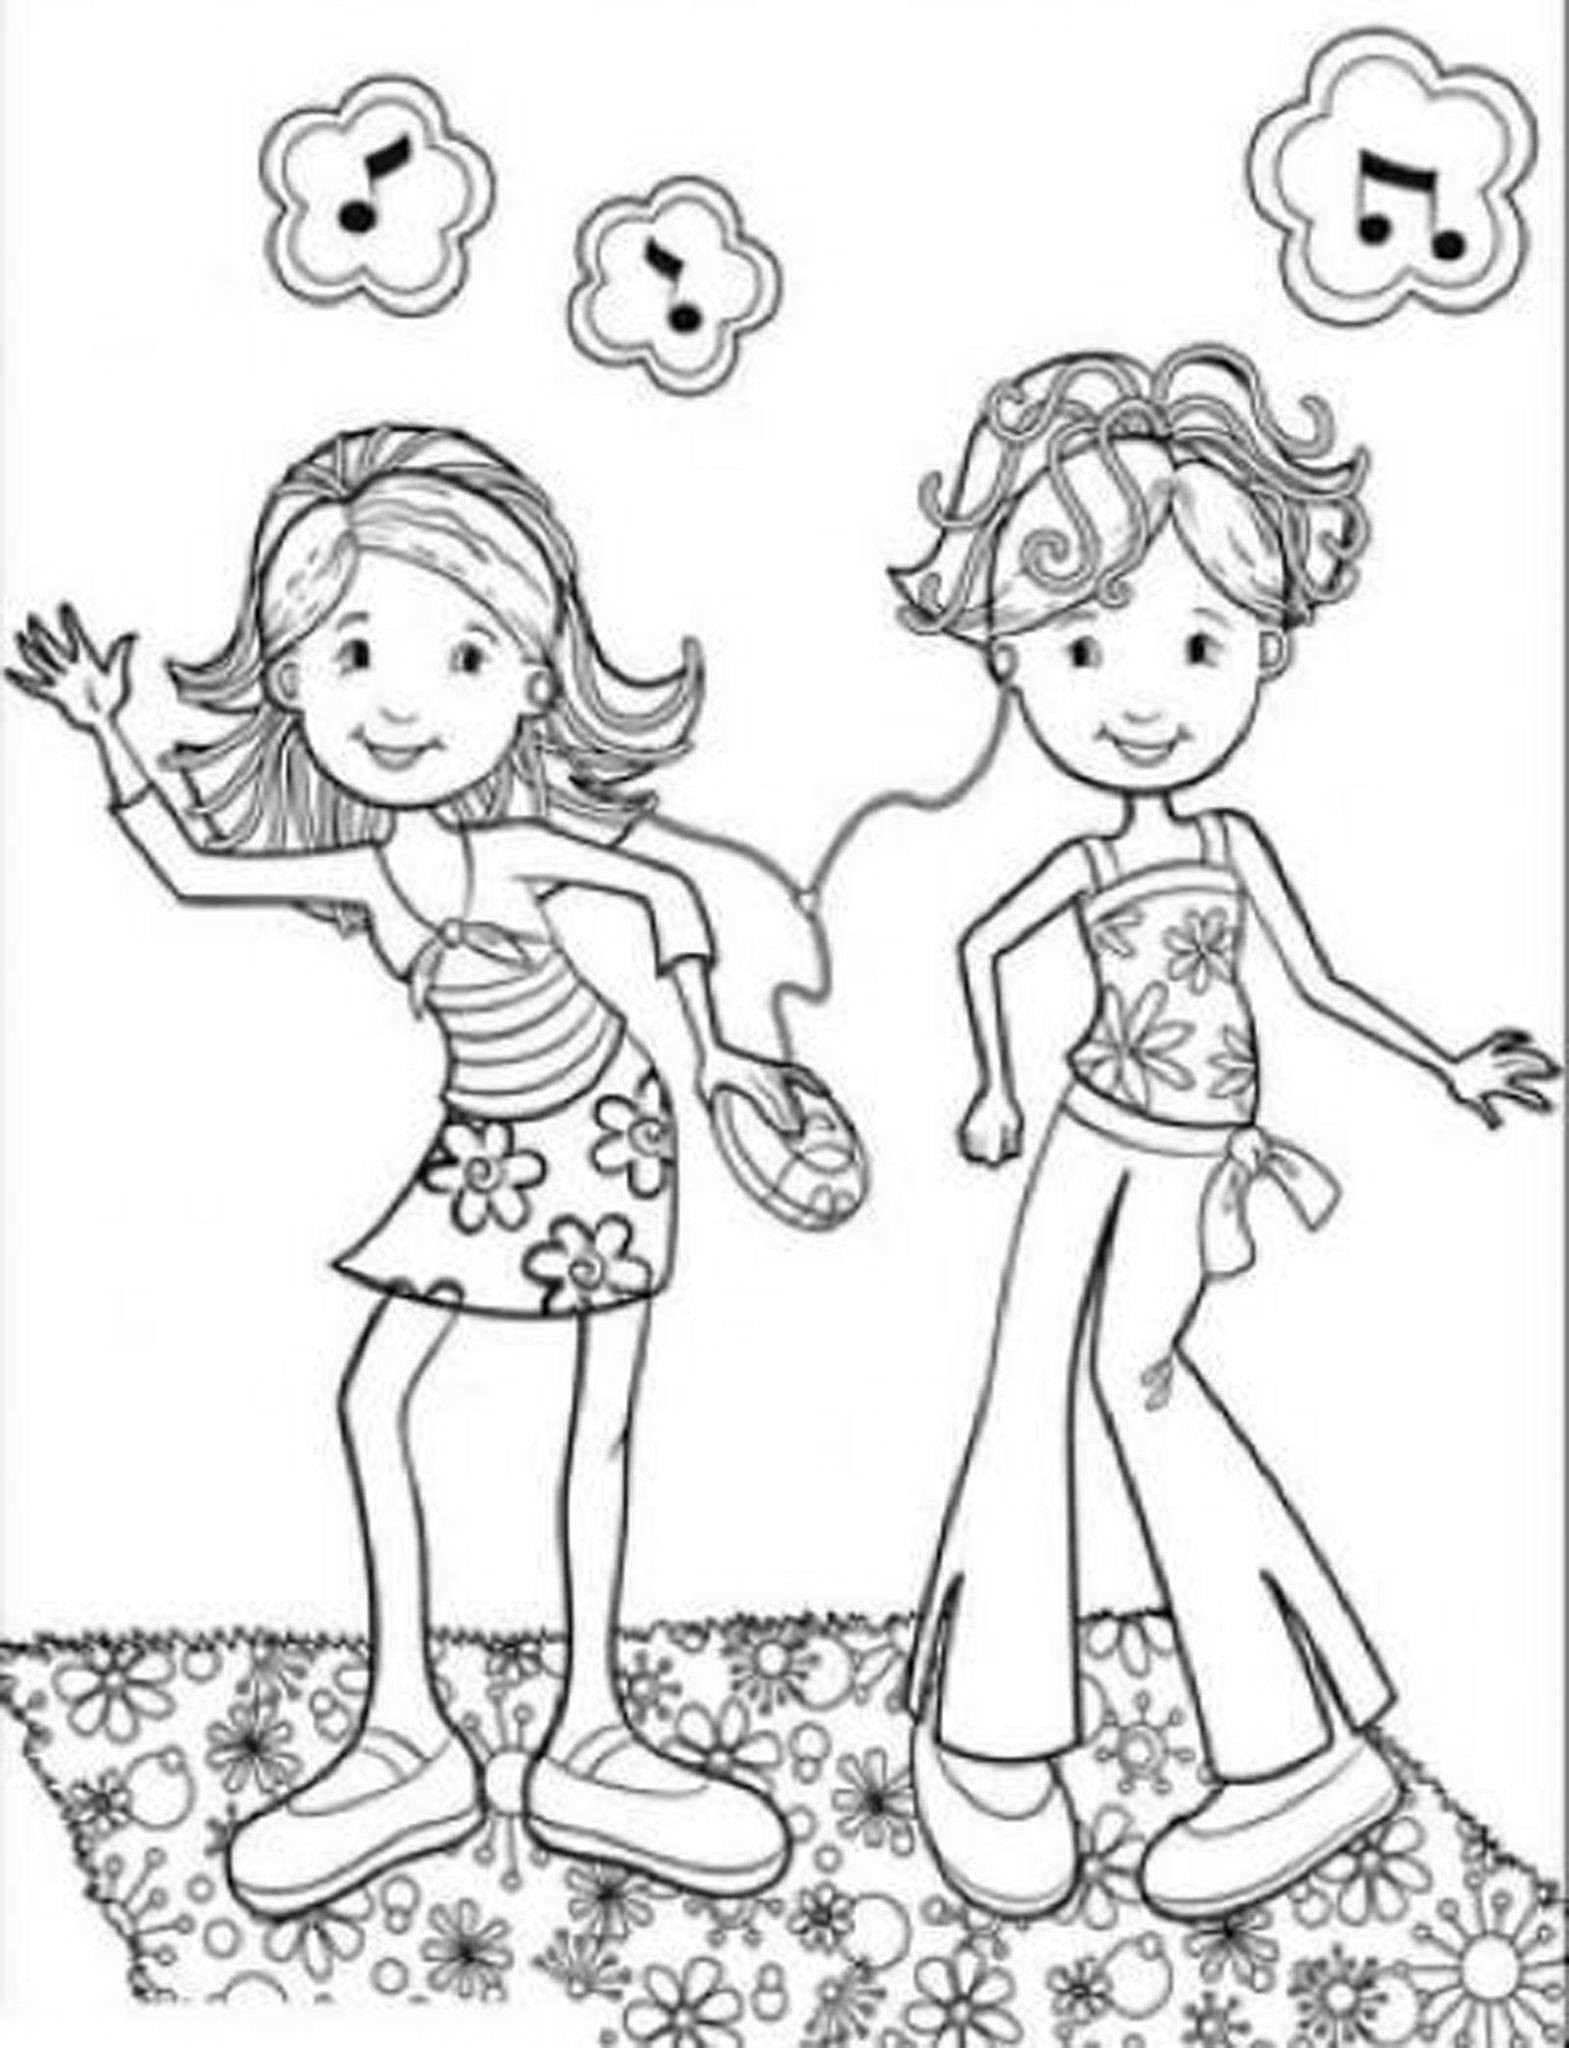 Kawaii Girls Coloring Pages
 Print & Download Coloring Pages for Girls Re mend a